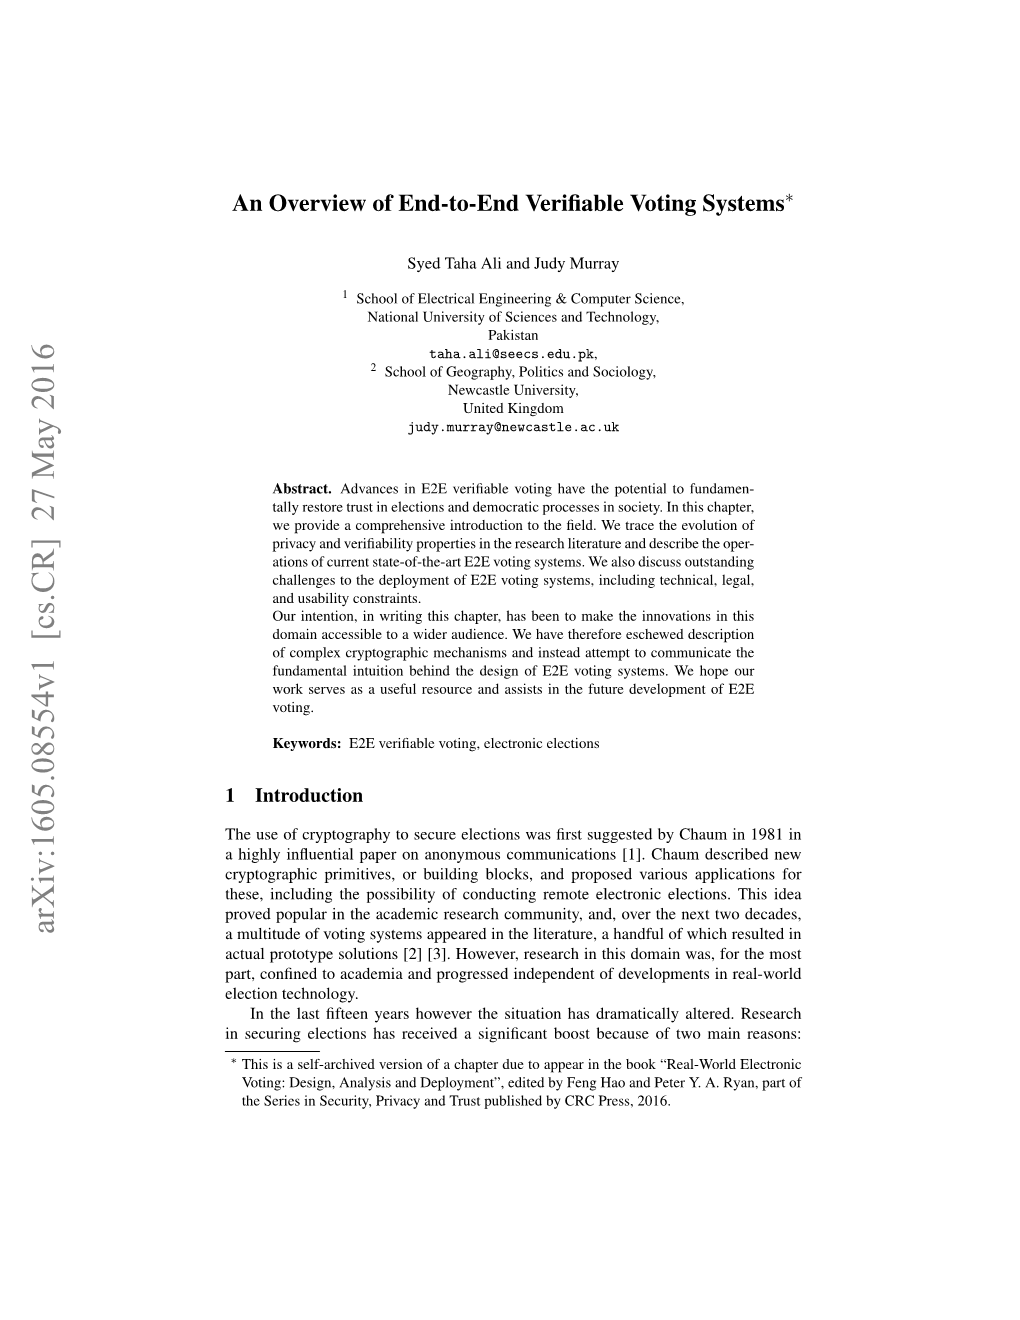 An Overview of End-To-End Verifiable Voting Systems